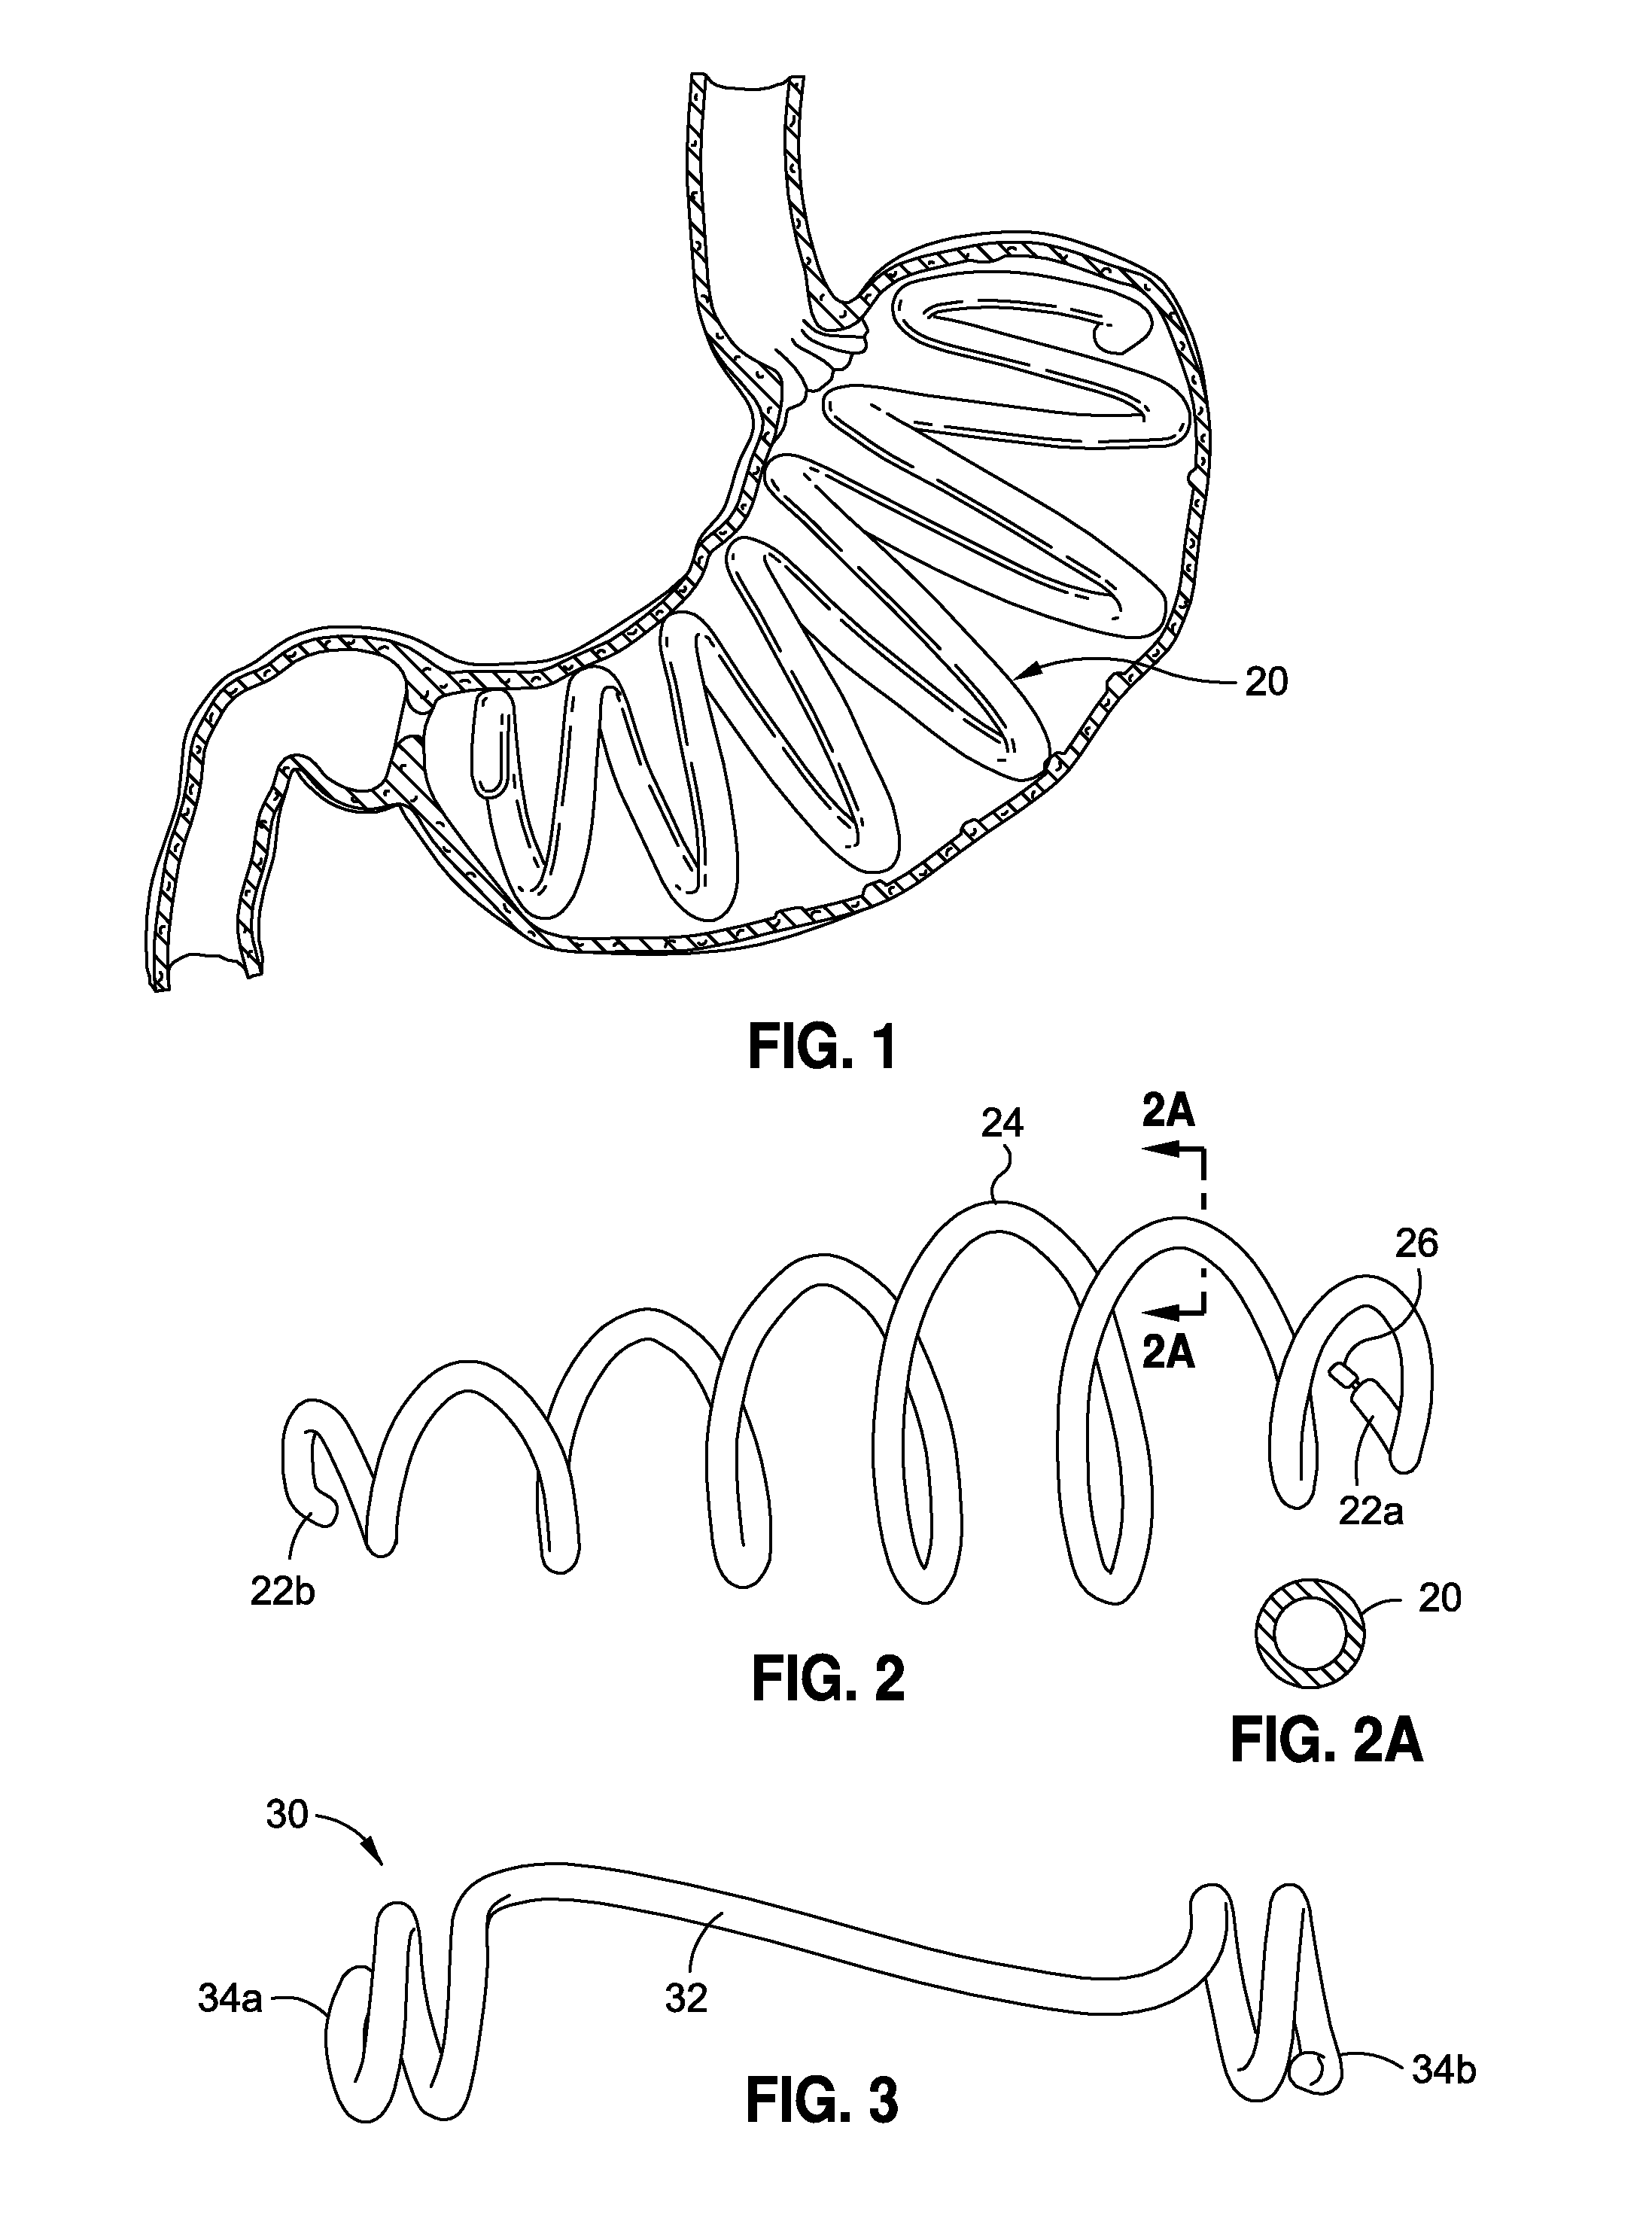 Non-inflatable gastric implants and systems